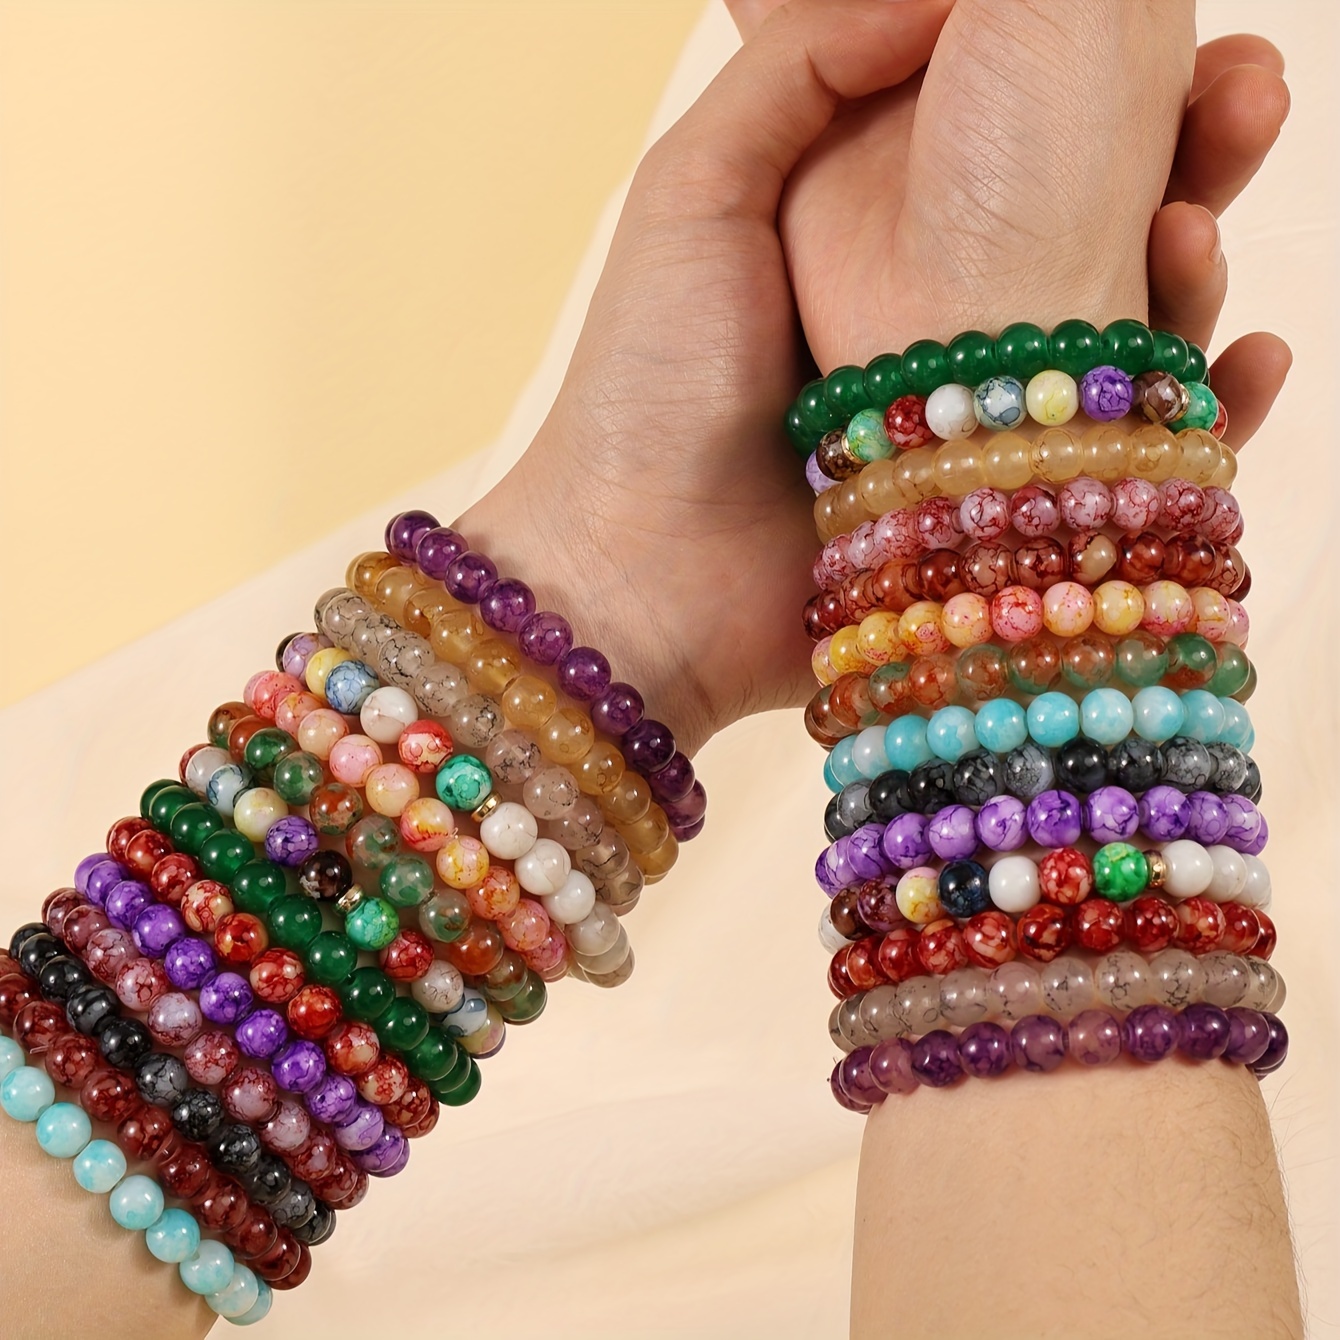 

Elegant 14-piece (or 12-piece) Colorful Crystal Beaded Glass Bracelets Set - Unique Cracked Design, Ideal For Daily Wear & Special Occasions